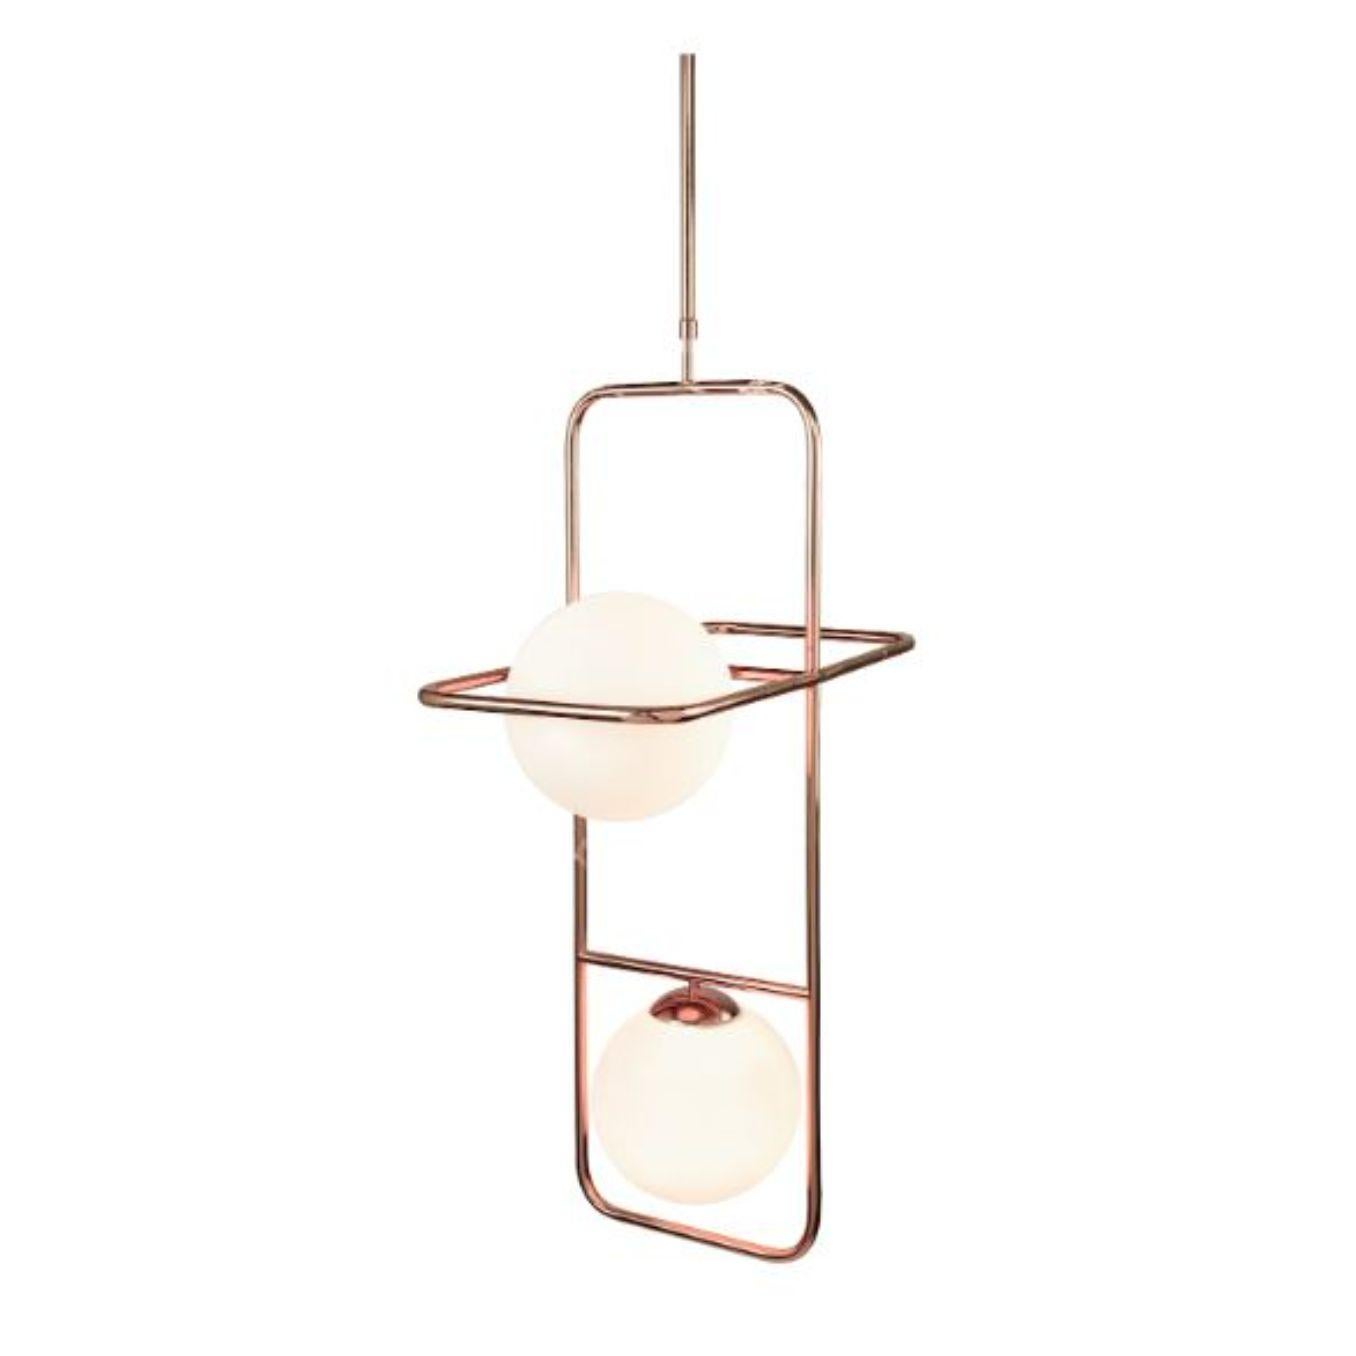 Copper link II suspension lamp by Dooq
Dimensions: W 64 x D 33 x H 100 cm
Materials: lacquered metal, polished or brushed metal, copper.
Also available in different colors and materials.

Information:
230V/50Hz
2 x max. G9
5W